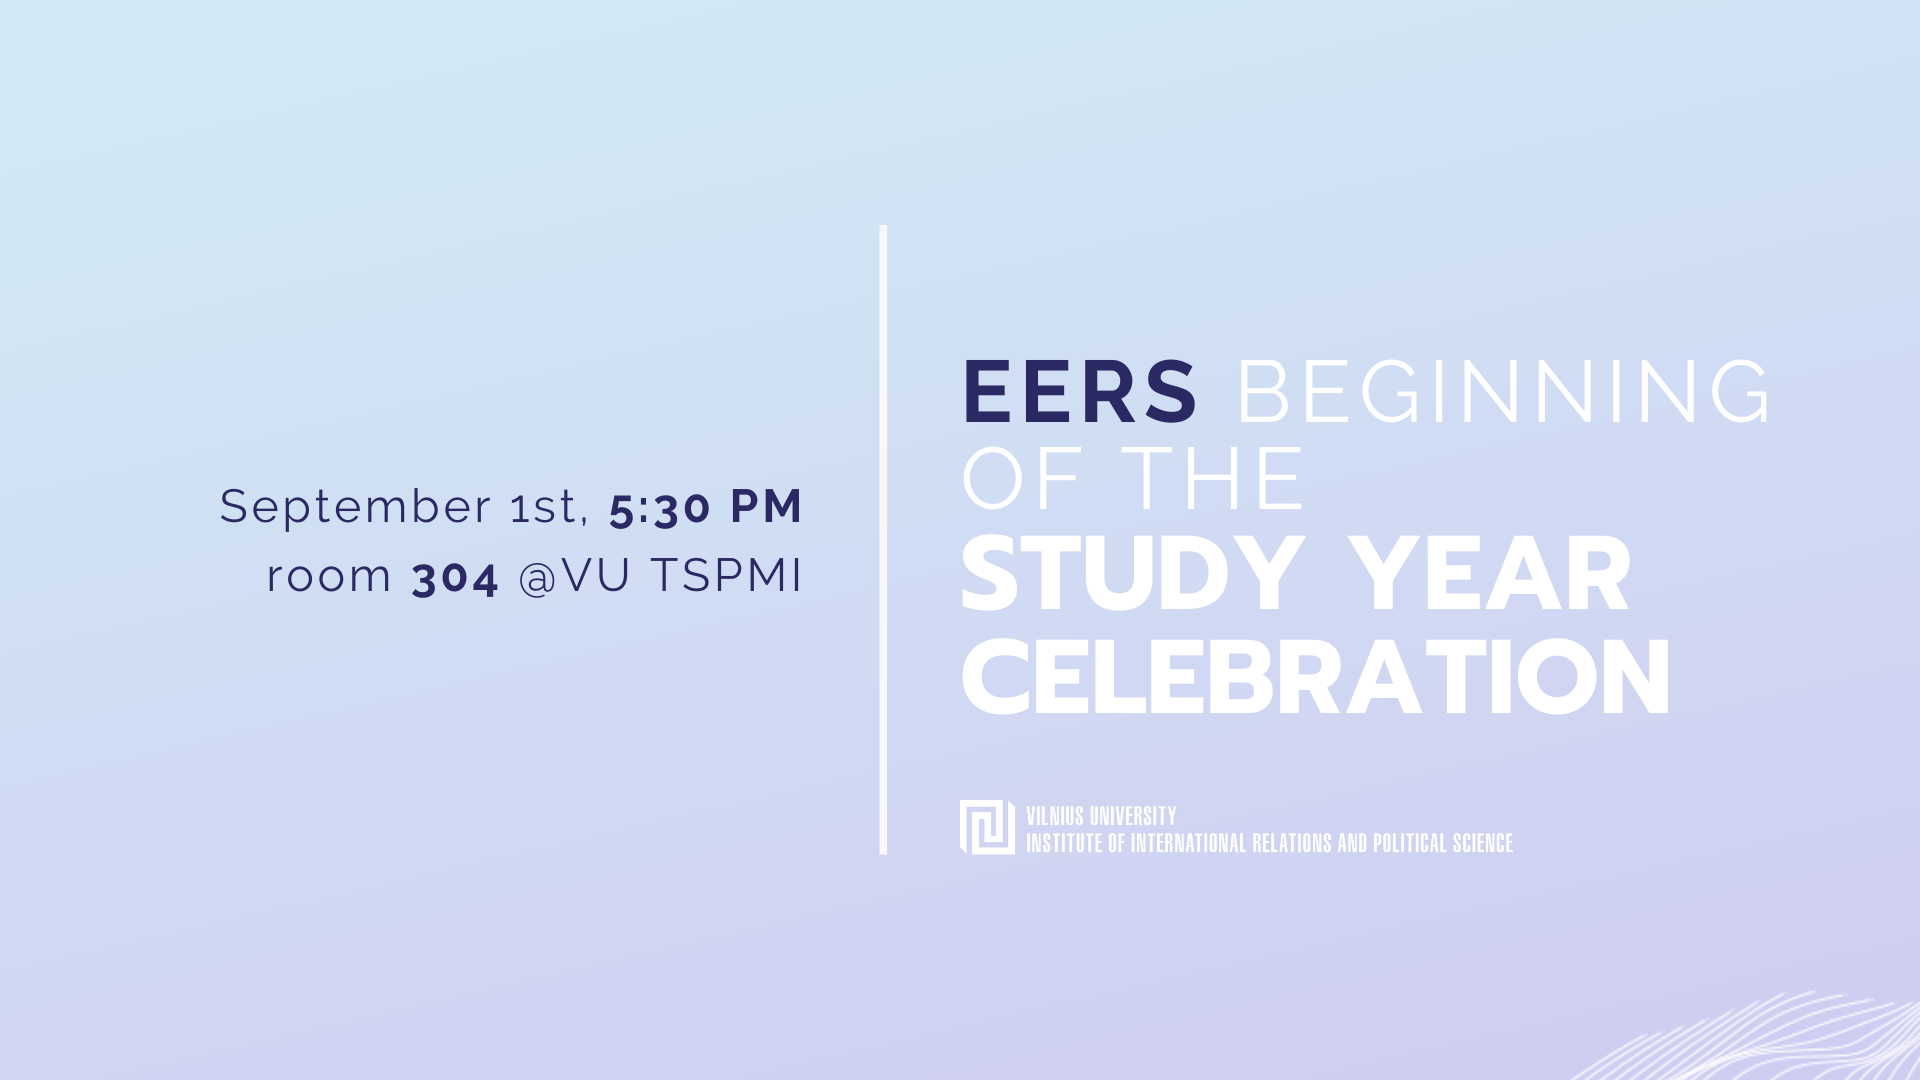 EERS beginning of the study year celebration